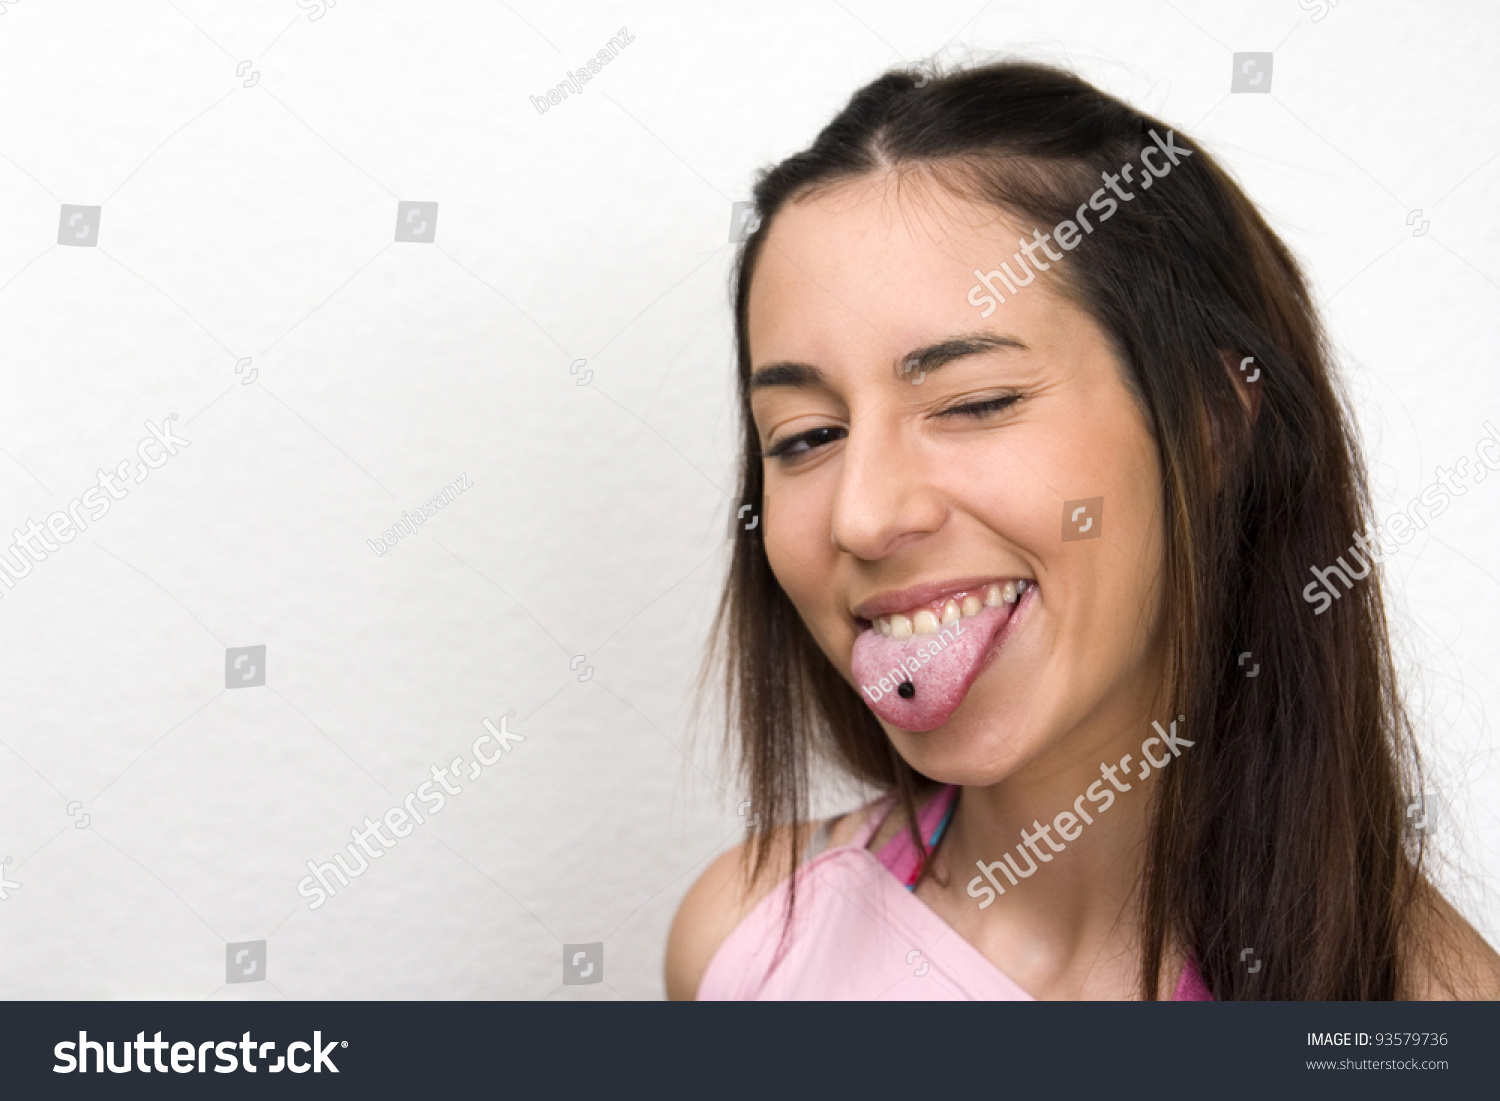 Girls sticking tongues out fan compilations